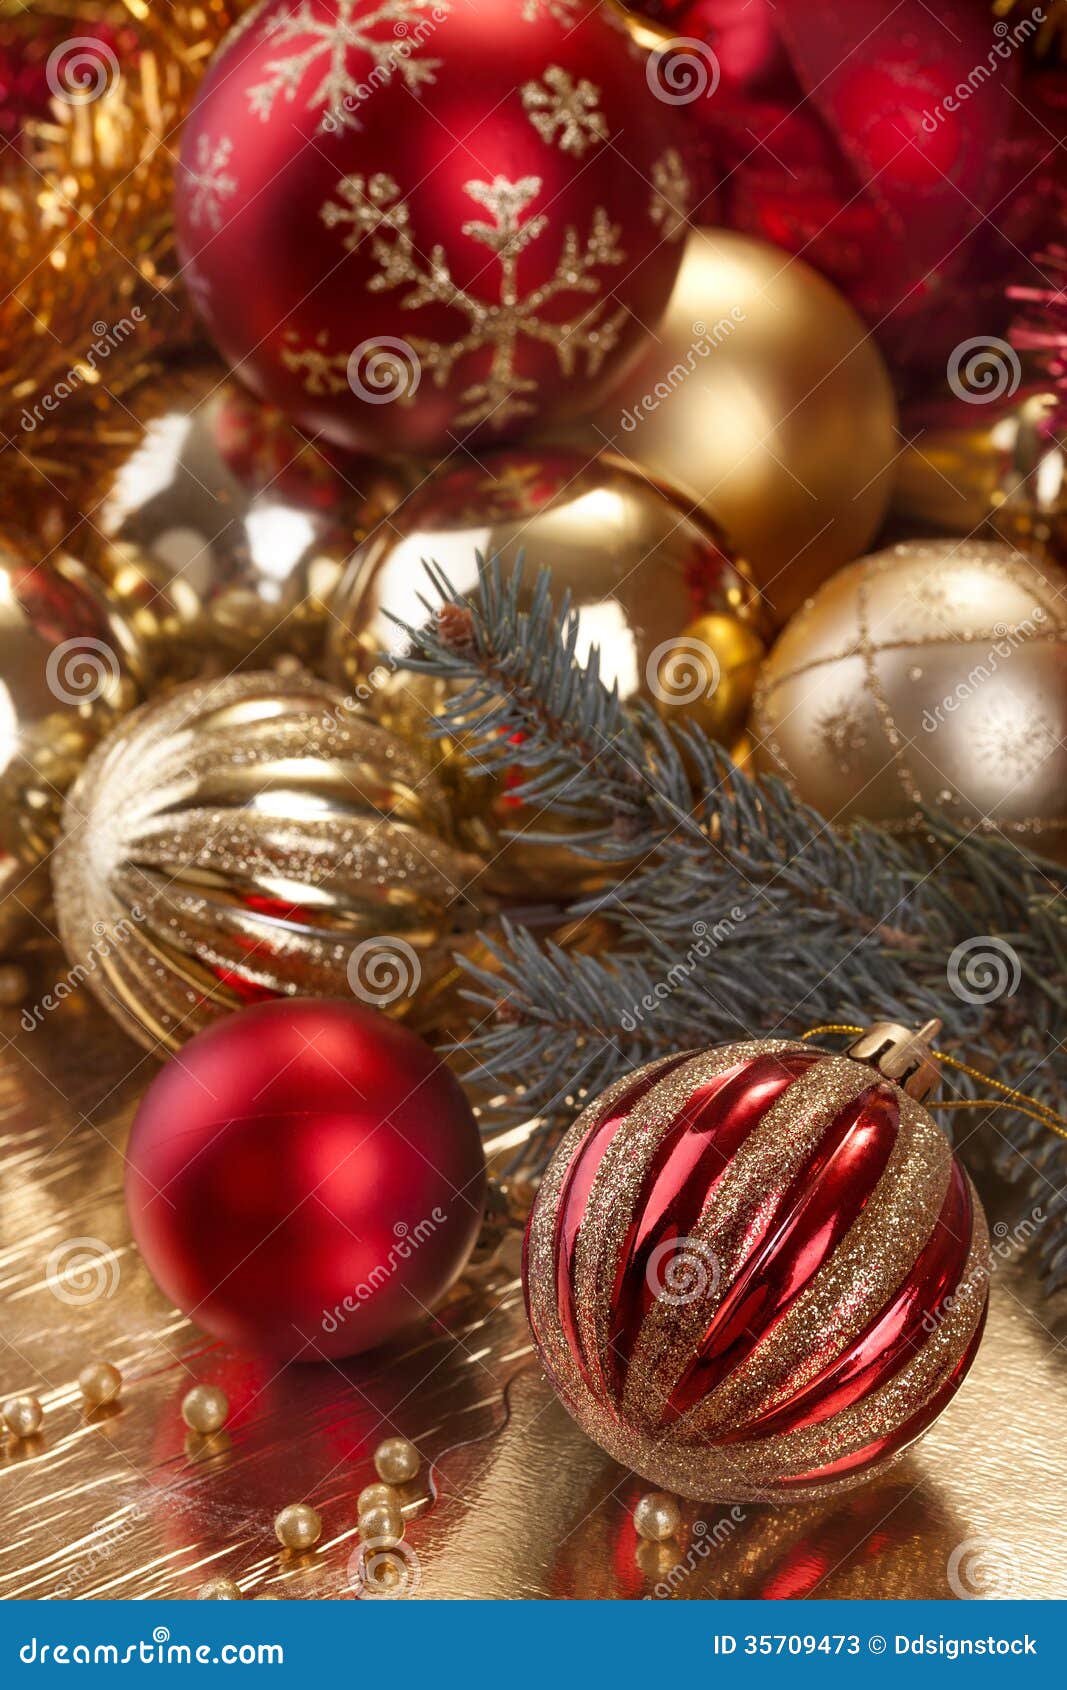 Christmas and New Year Decoration Stock Image - Image of decorations ...